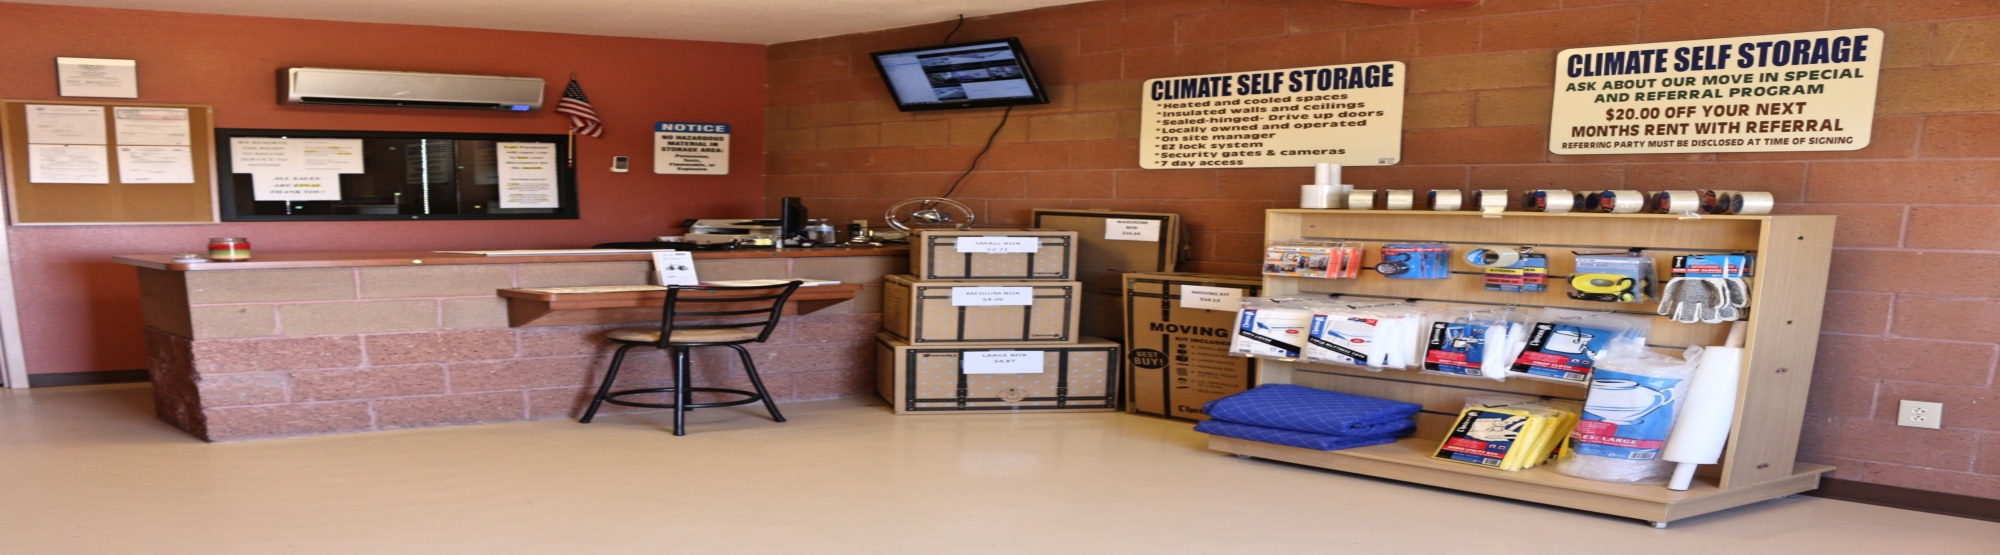 Self Storage Units in NM and TX | Climate Self Storage